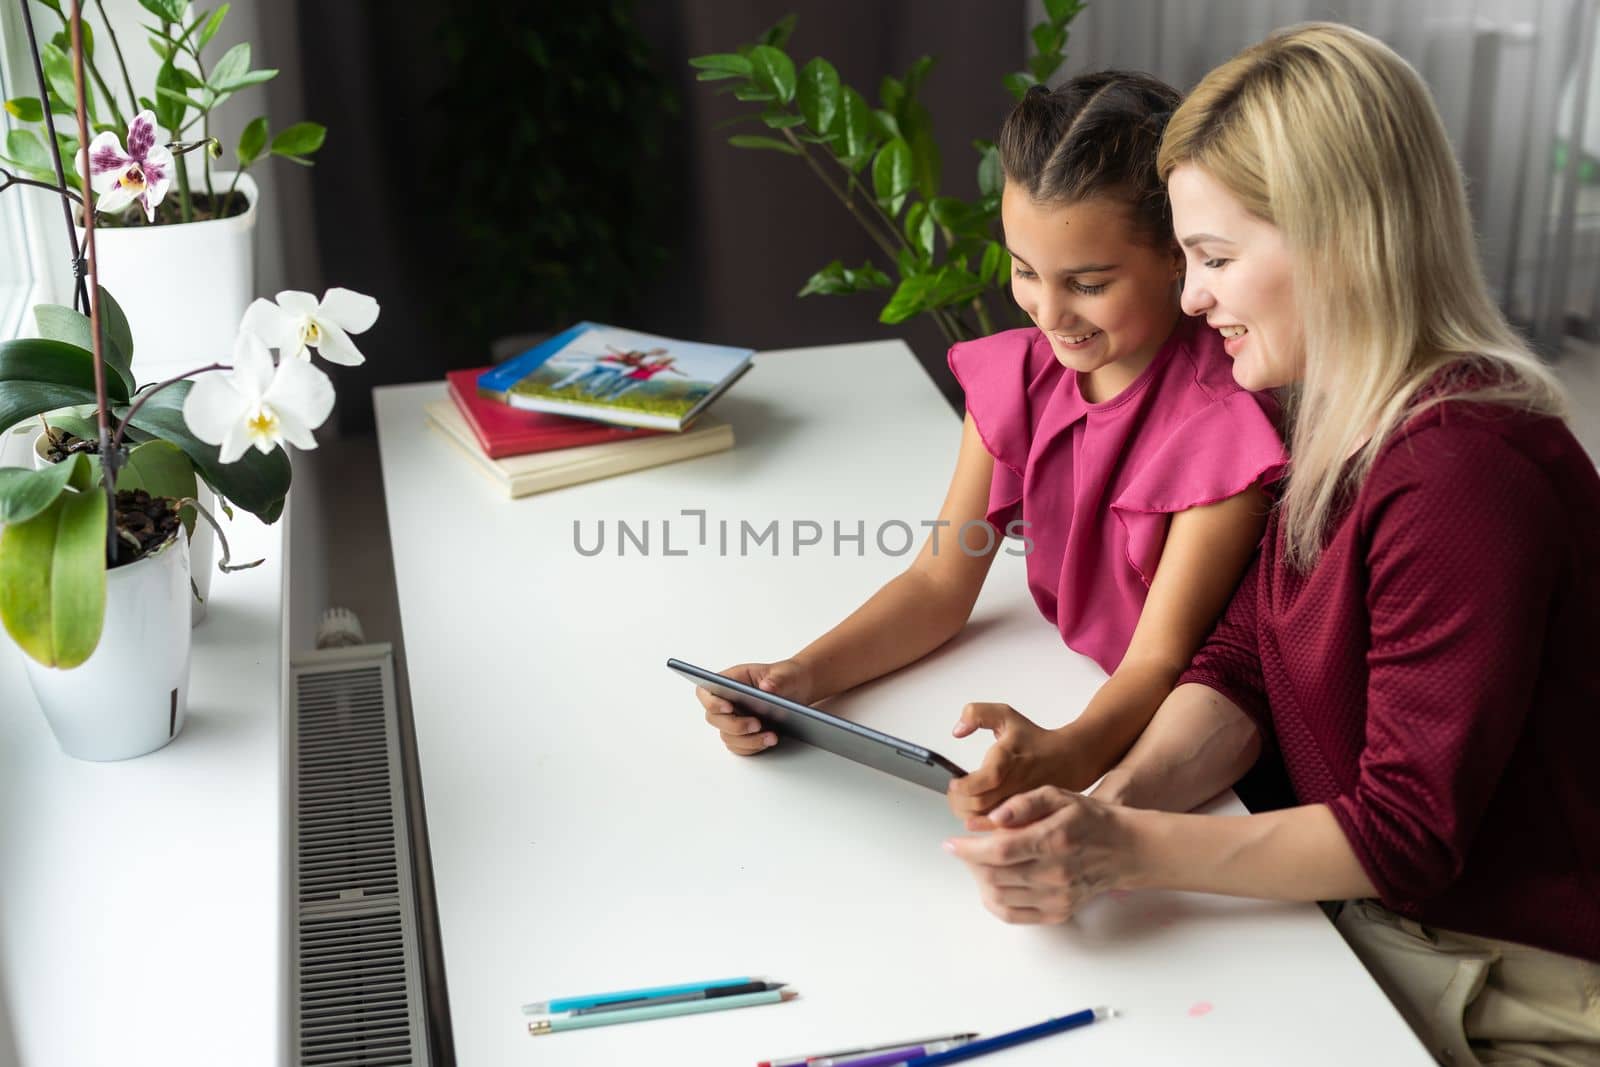 Mom with her tween daughter using tablet ipad together by Andelov13